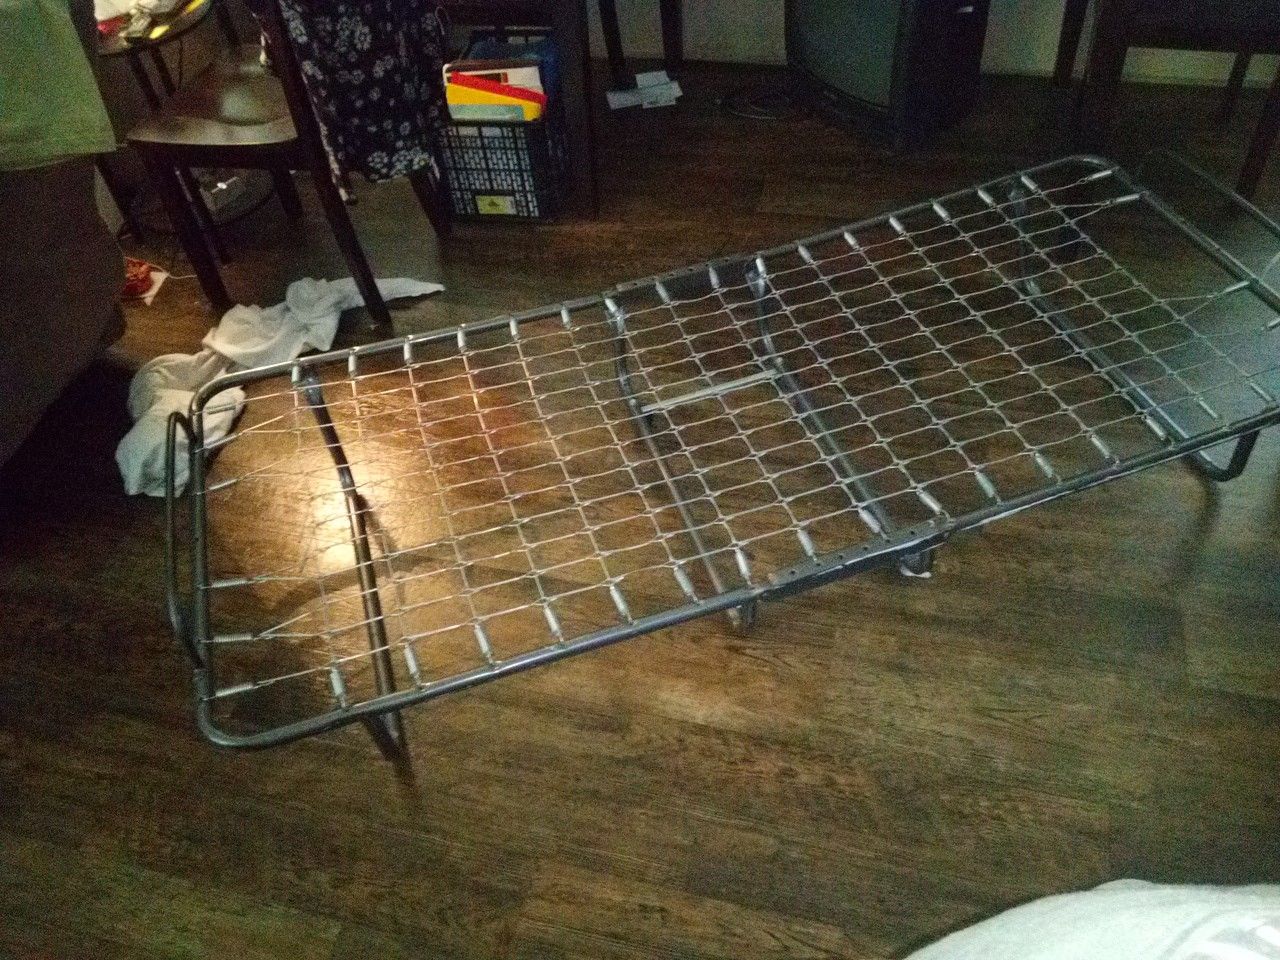 Made of Steel & Sturdy RollAway Portable Guest-Bed w/ springs